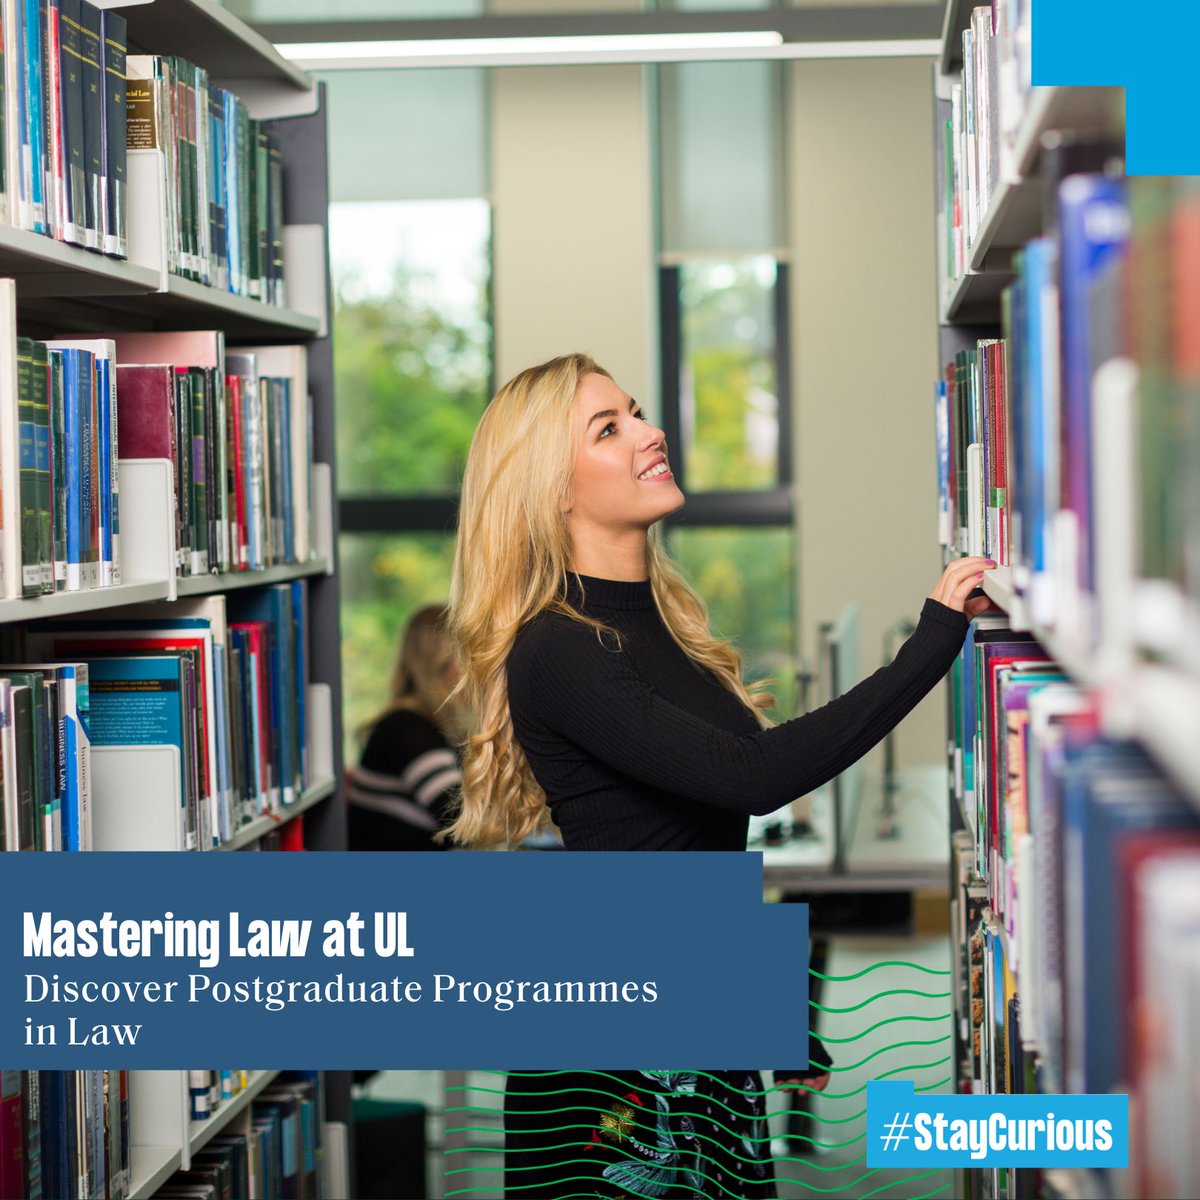 Advance your career with our range of postgraduate options in Law at the University of Limerick. Learn from top practitioners & academics at @ULSchoolofLaw, and develop skills and attributes needed for legal practice in Ireland and beyond. Learn more: eu1.hubs.ly/H08nLB40